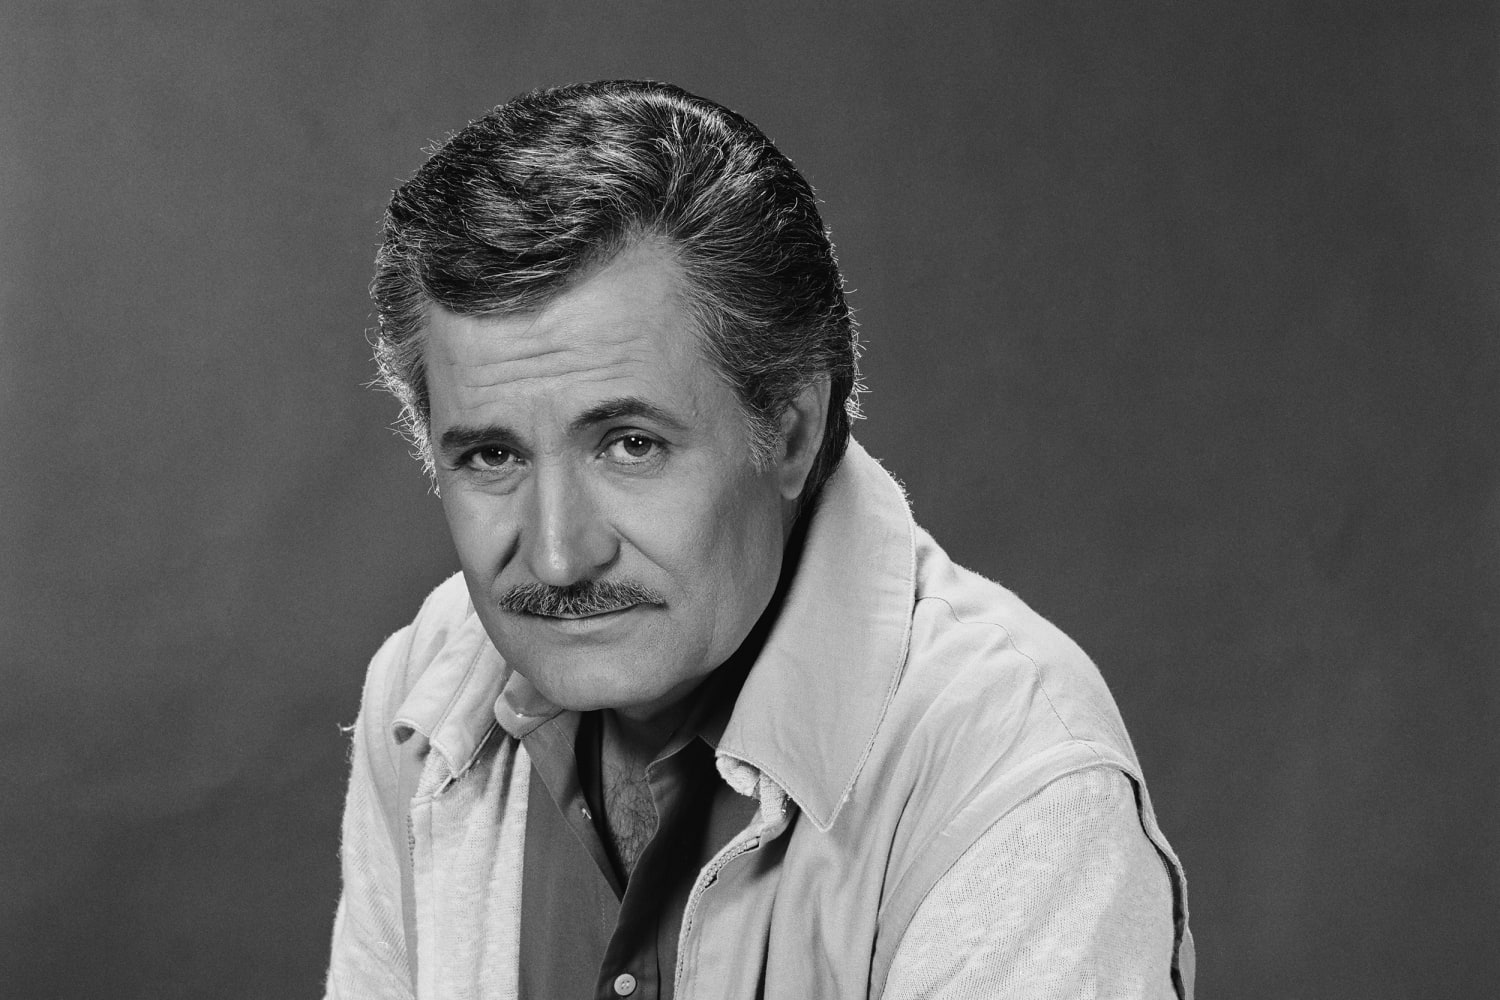 John Aniston, 'Days of Our Lives' star and Jennifer Aniston's father, dies  at 89